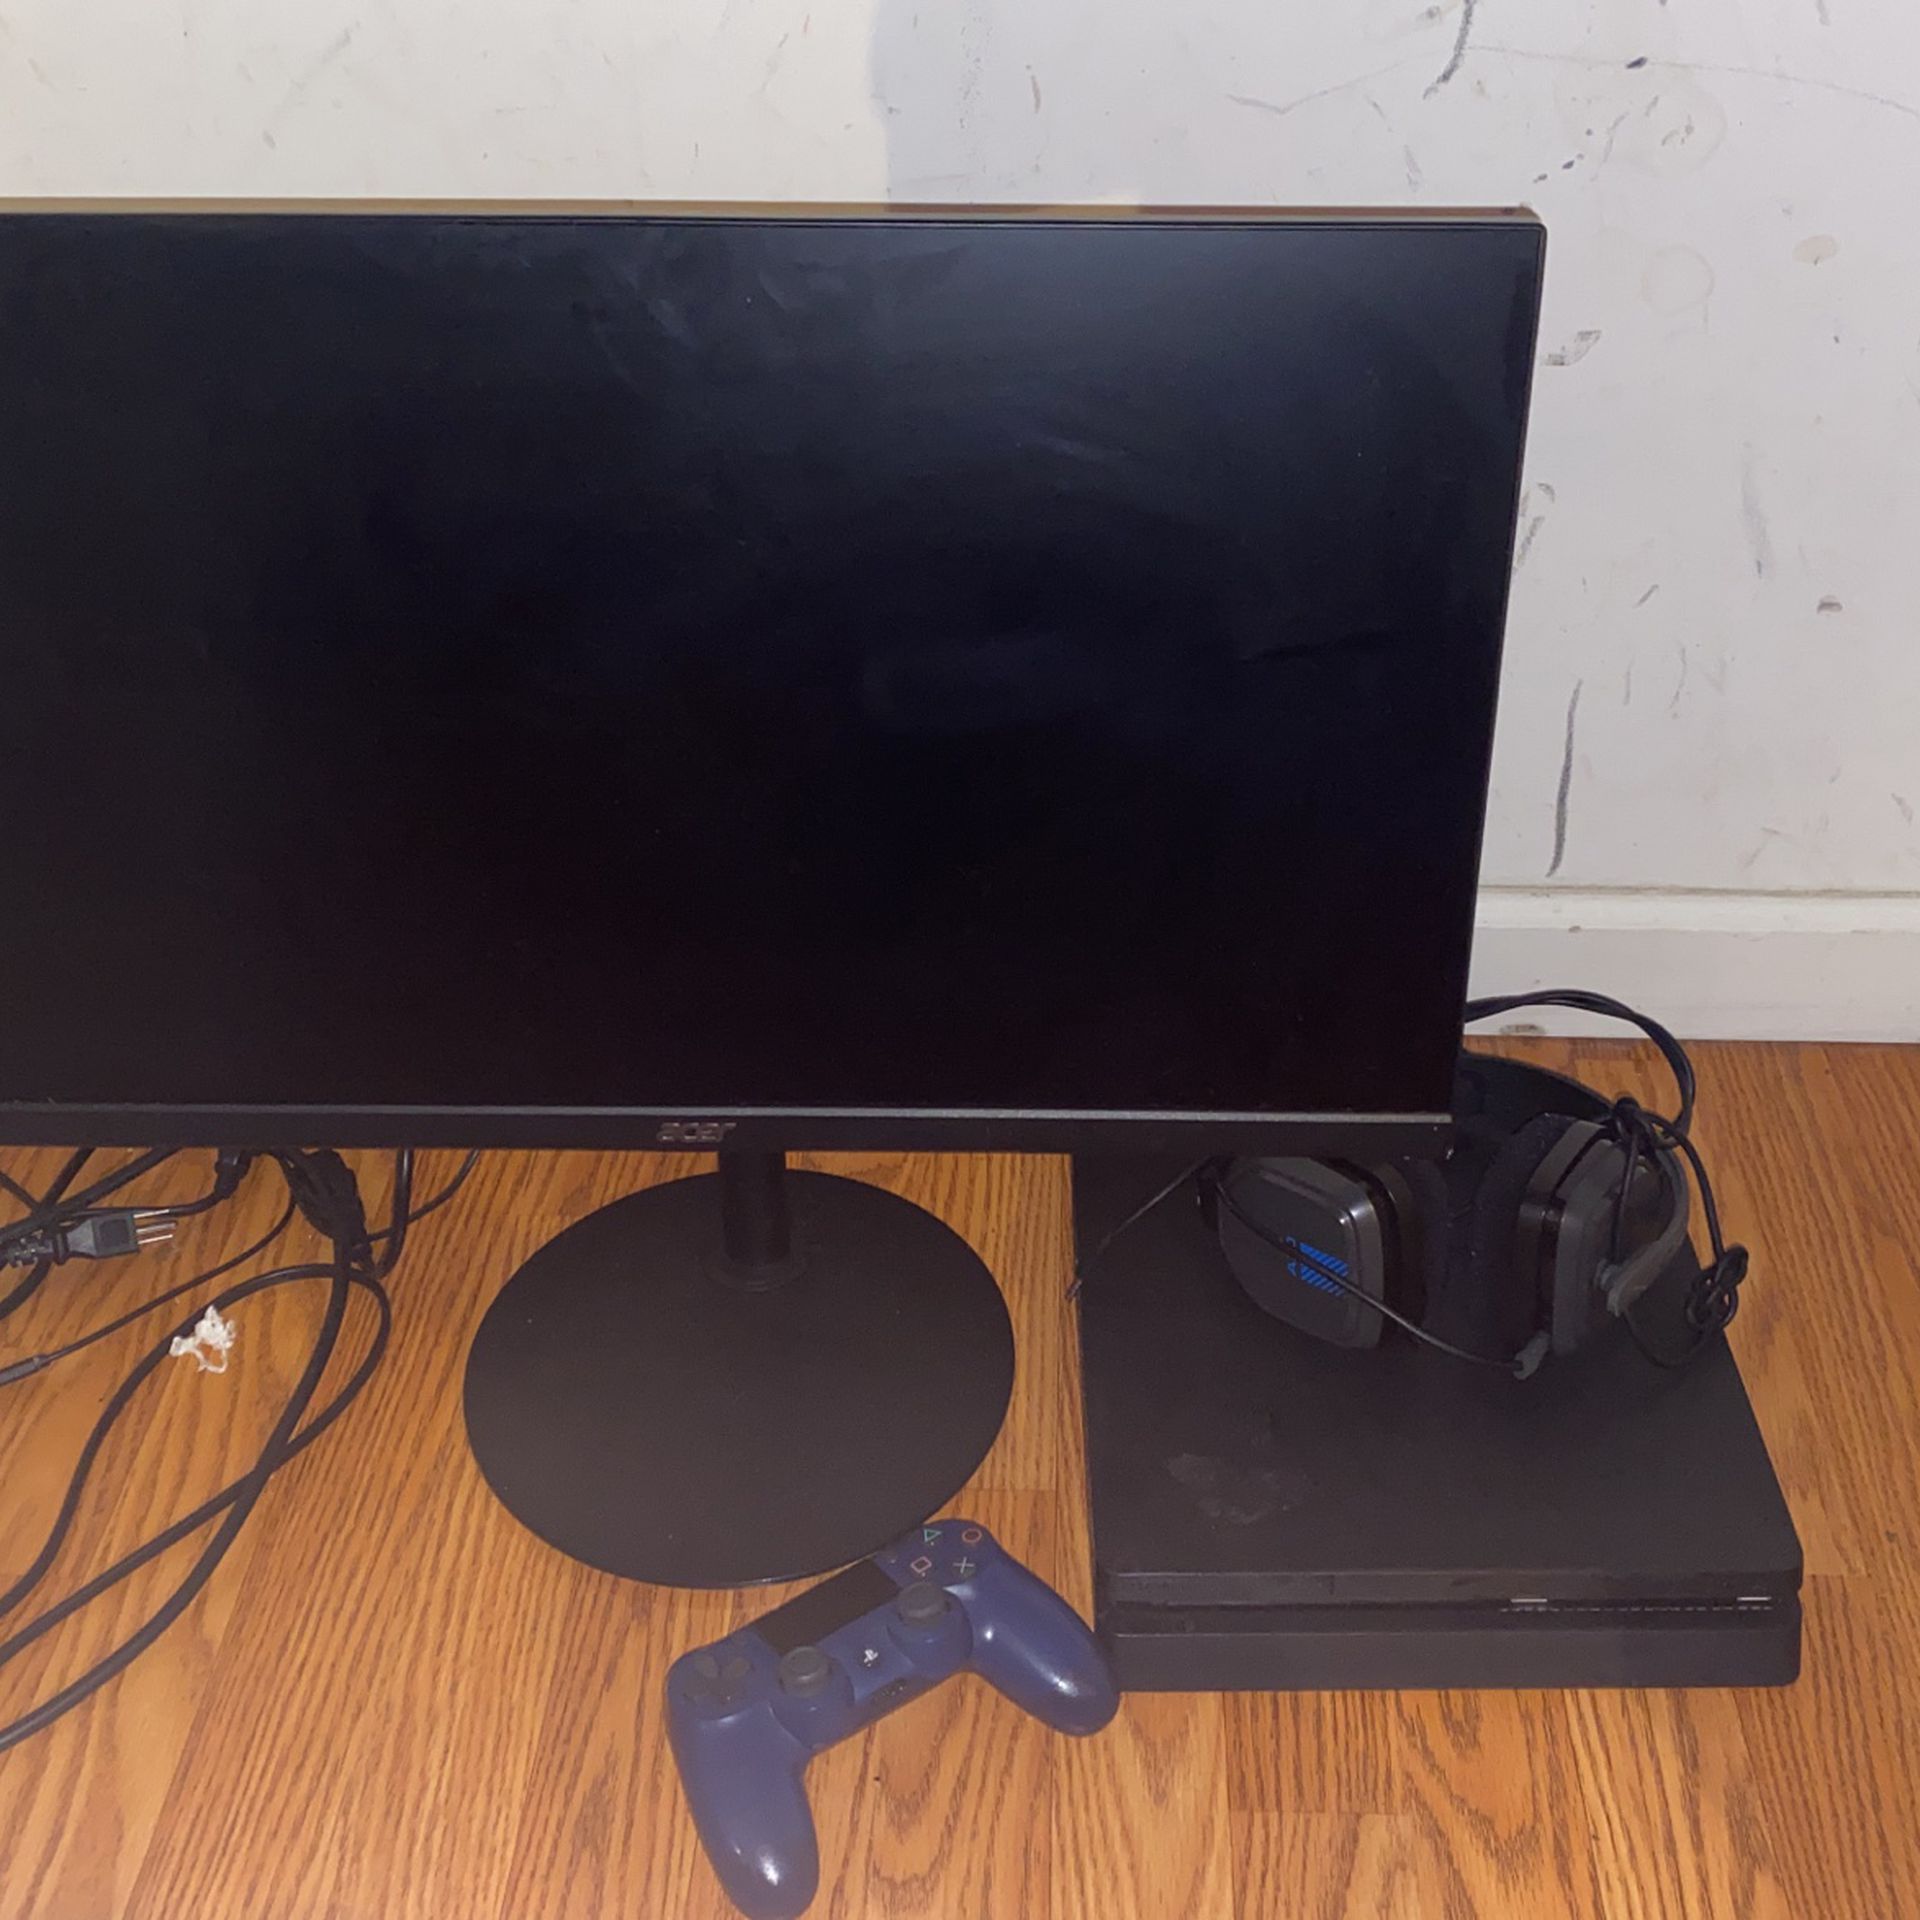 Ps4 Controller Headset And Monitor